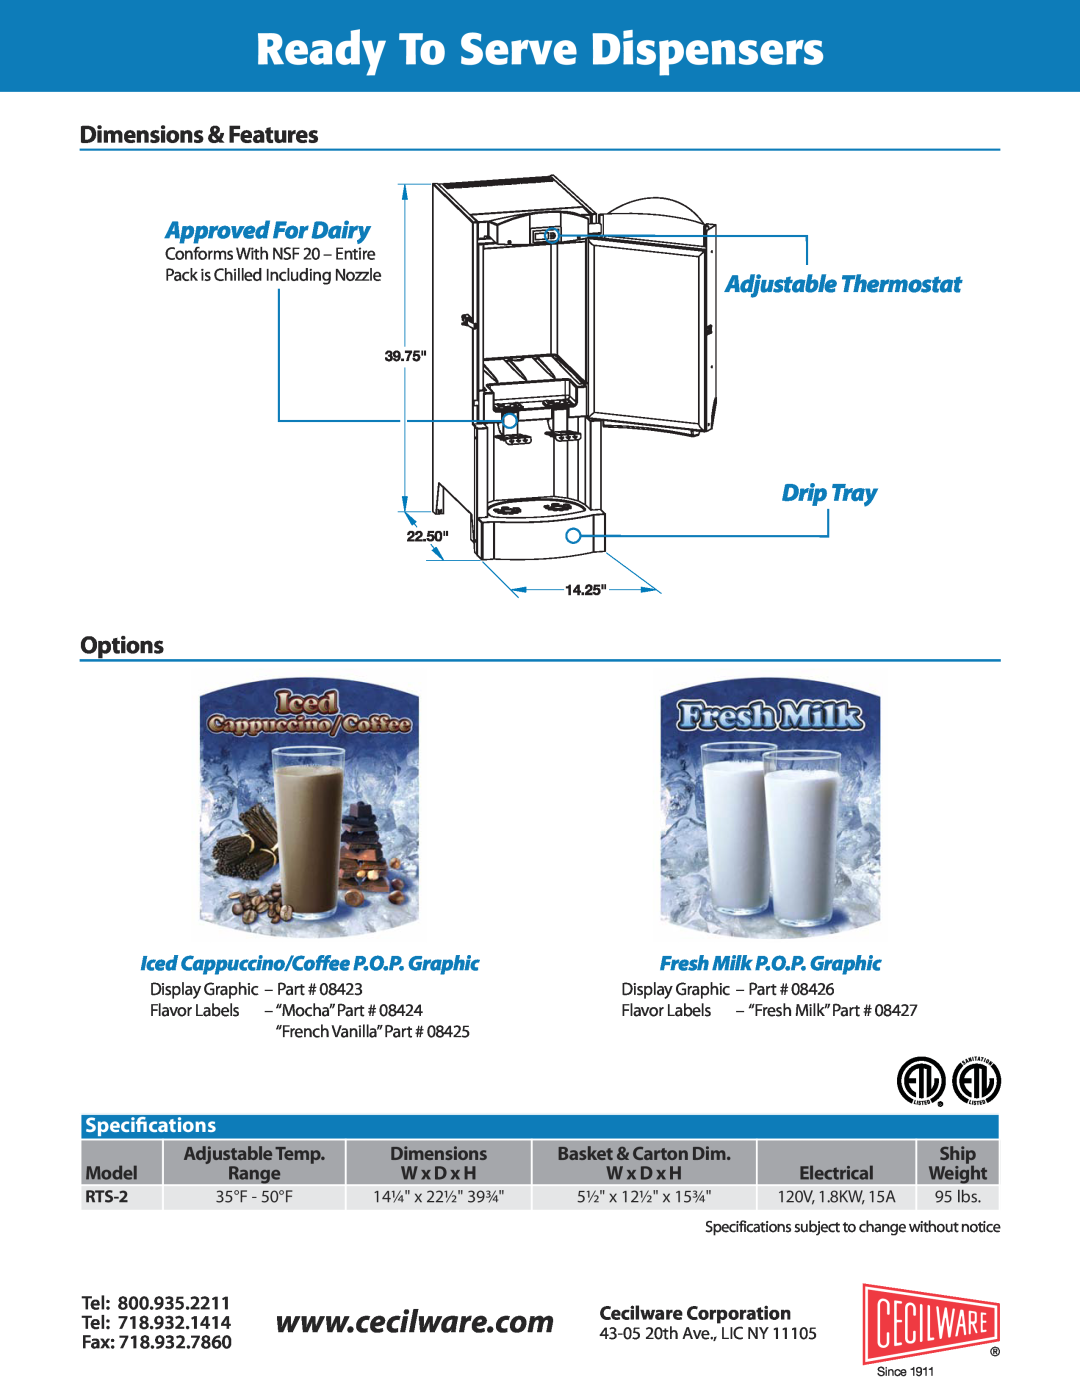 Cecilware Ready To Serve Dispensers Dimensions& Features, ApprovedForDairy, AdjustableThermostat, DripTray, Options, Model 